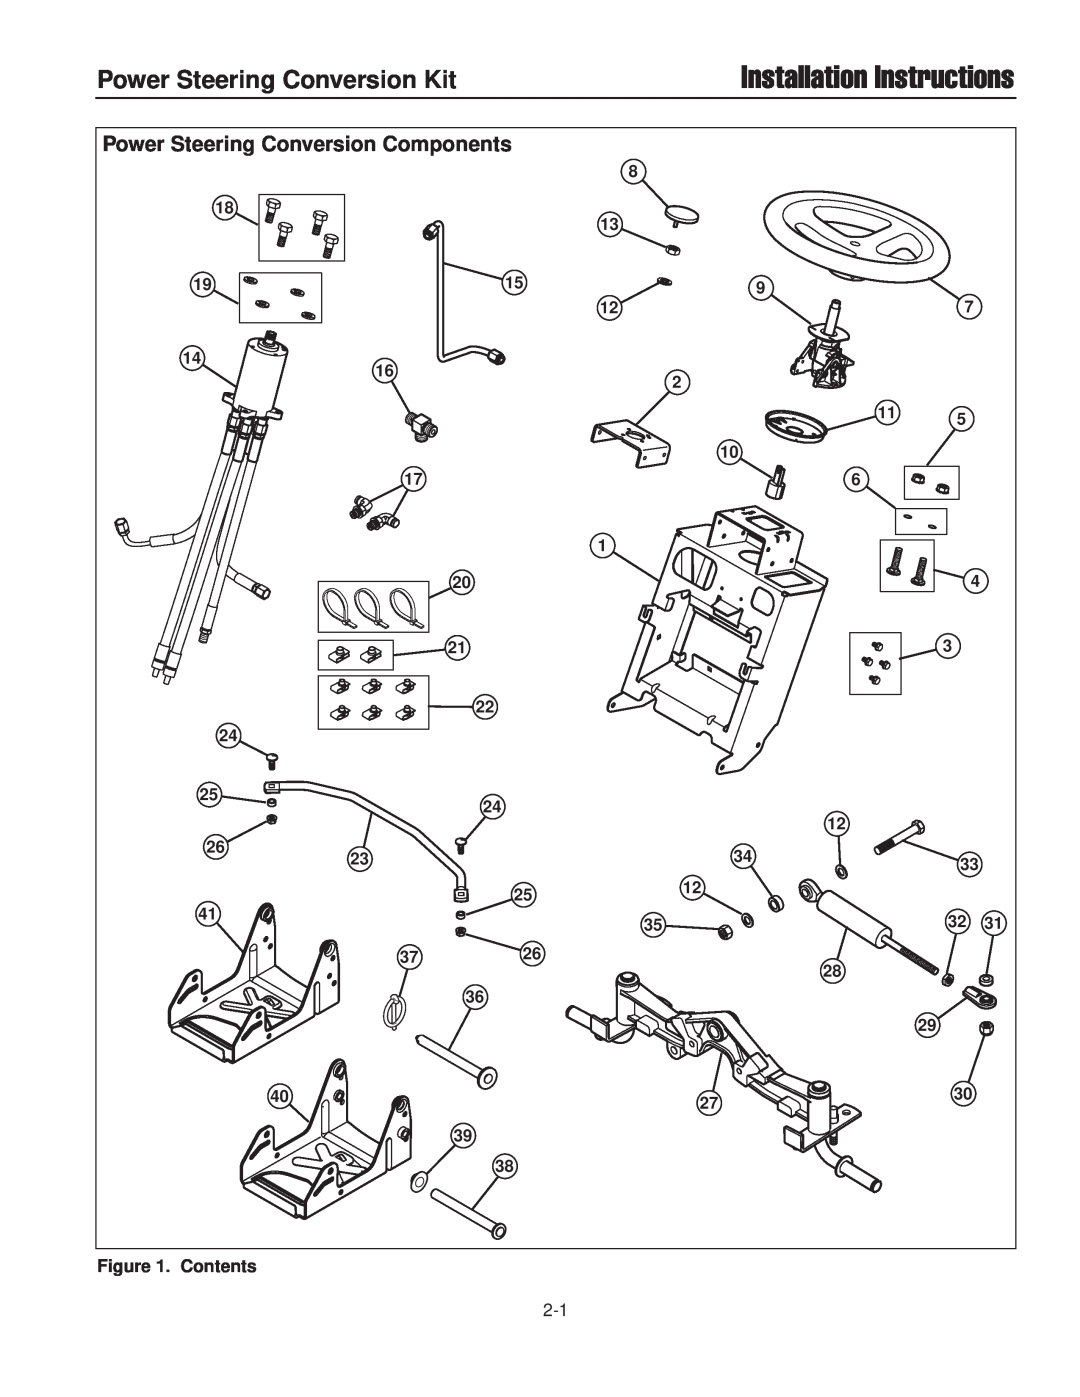 Briggs & Stratton 1687302 Power Steering Conversion Kit, Power Steering Conversion Components, Installation Instructions 